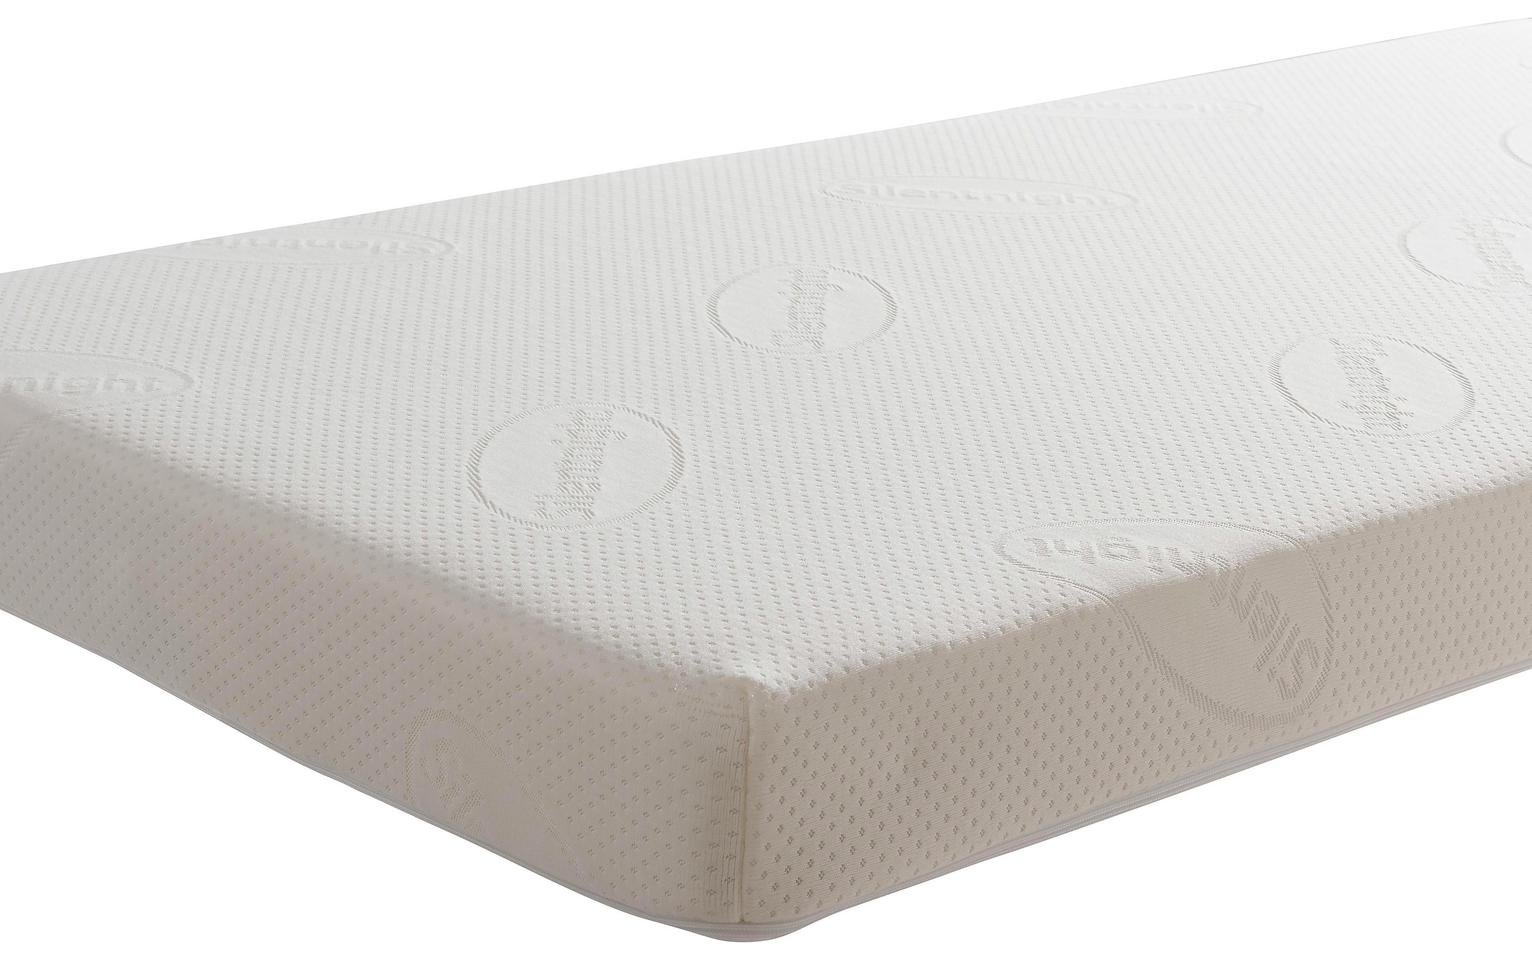 Suitable from Birth 120 x 60cm Breathable Silentnight Safe Nights Airflow Cot // Toddler Bed Mattress Foam /& Chemical Free